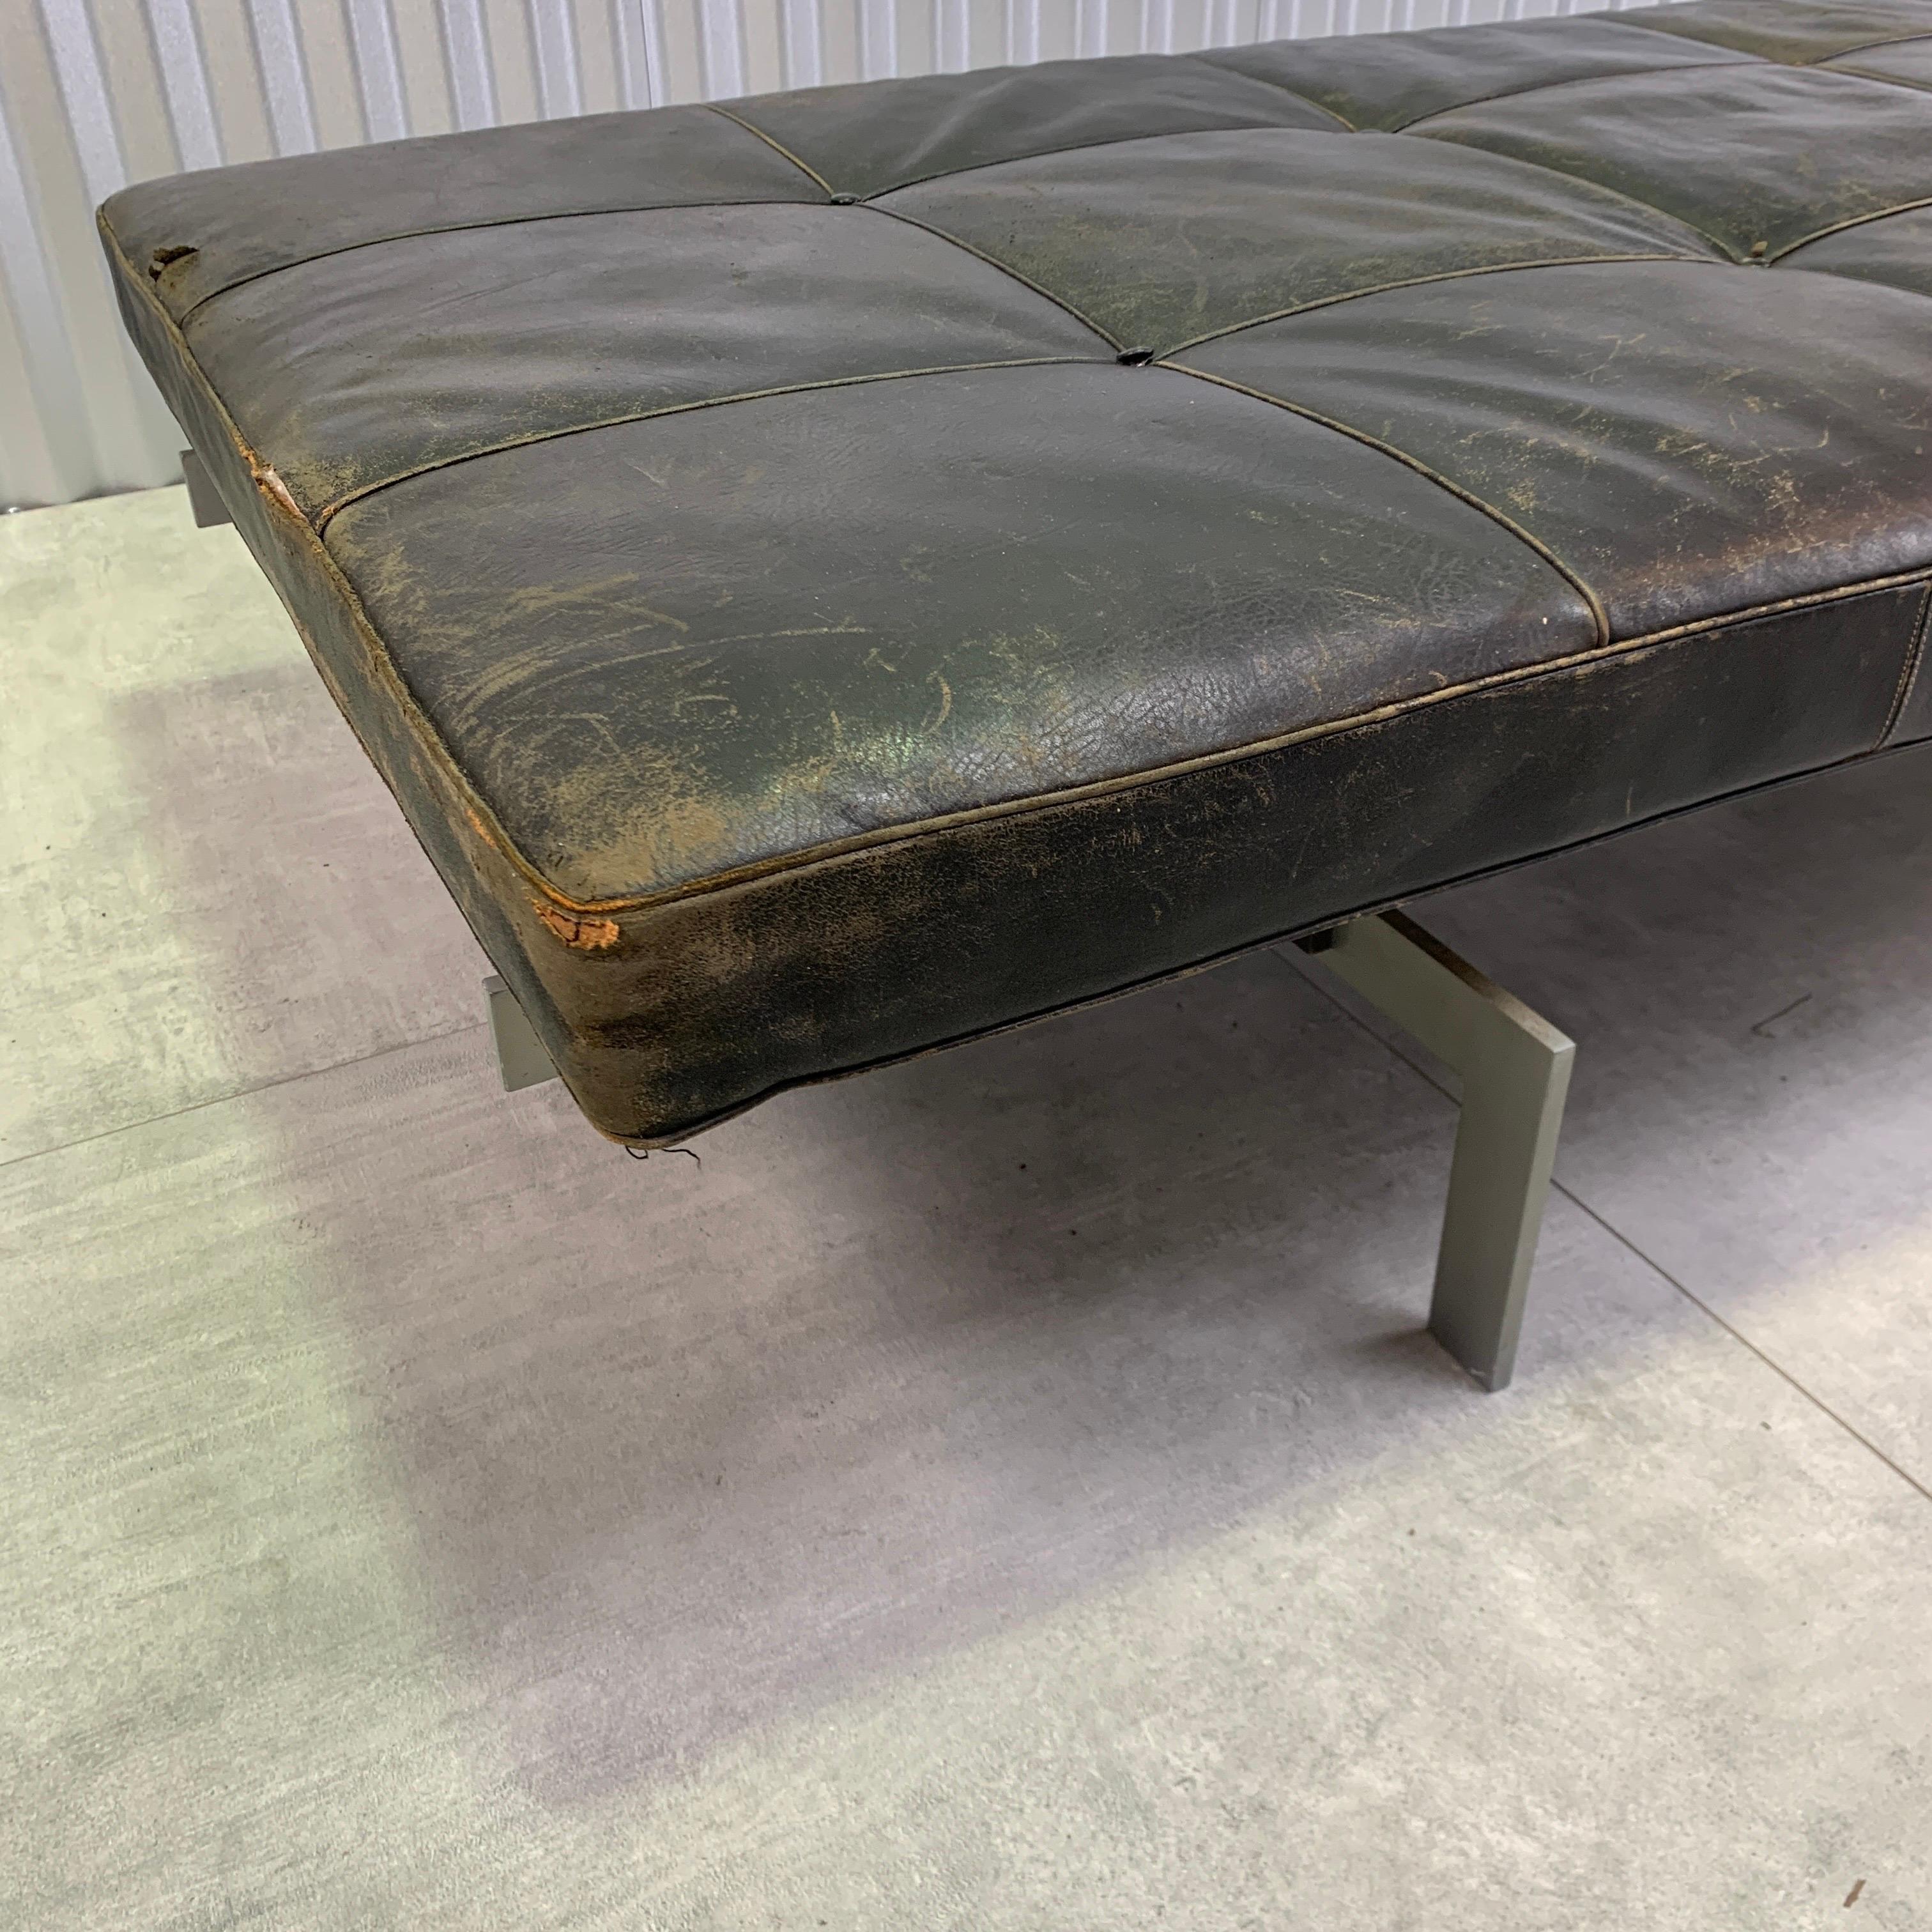 Poul Kjaerholm PK-80 Daybed or Bench for E Kold Christiansen  In Distressed Condition For Sale In Danville, CA